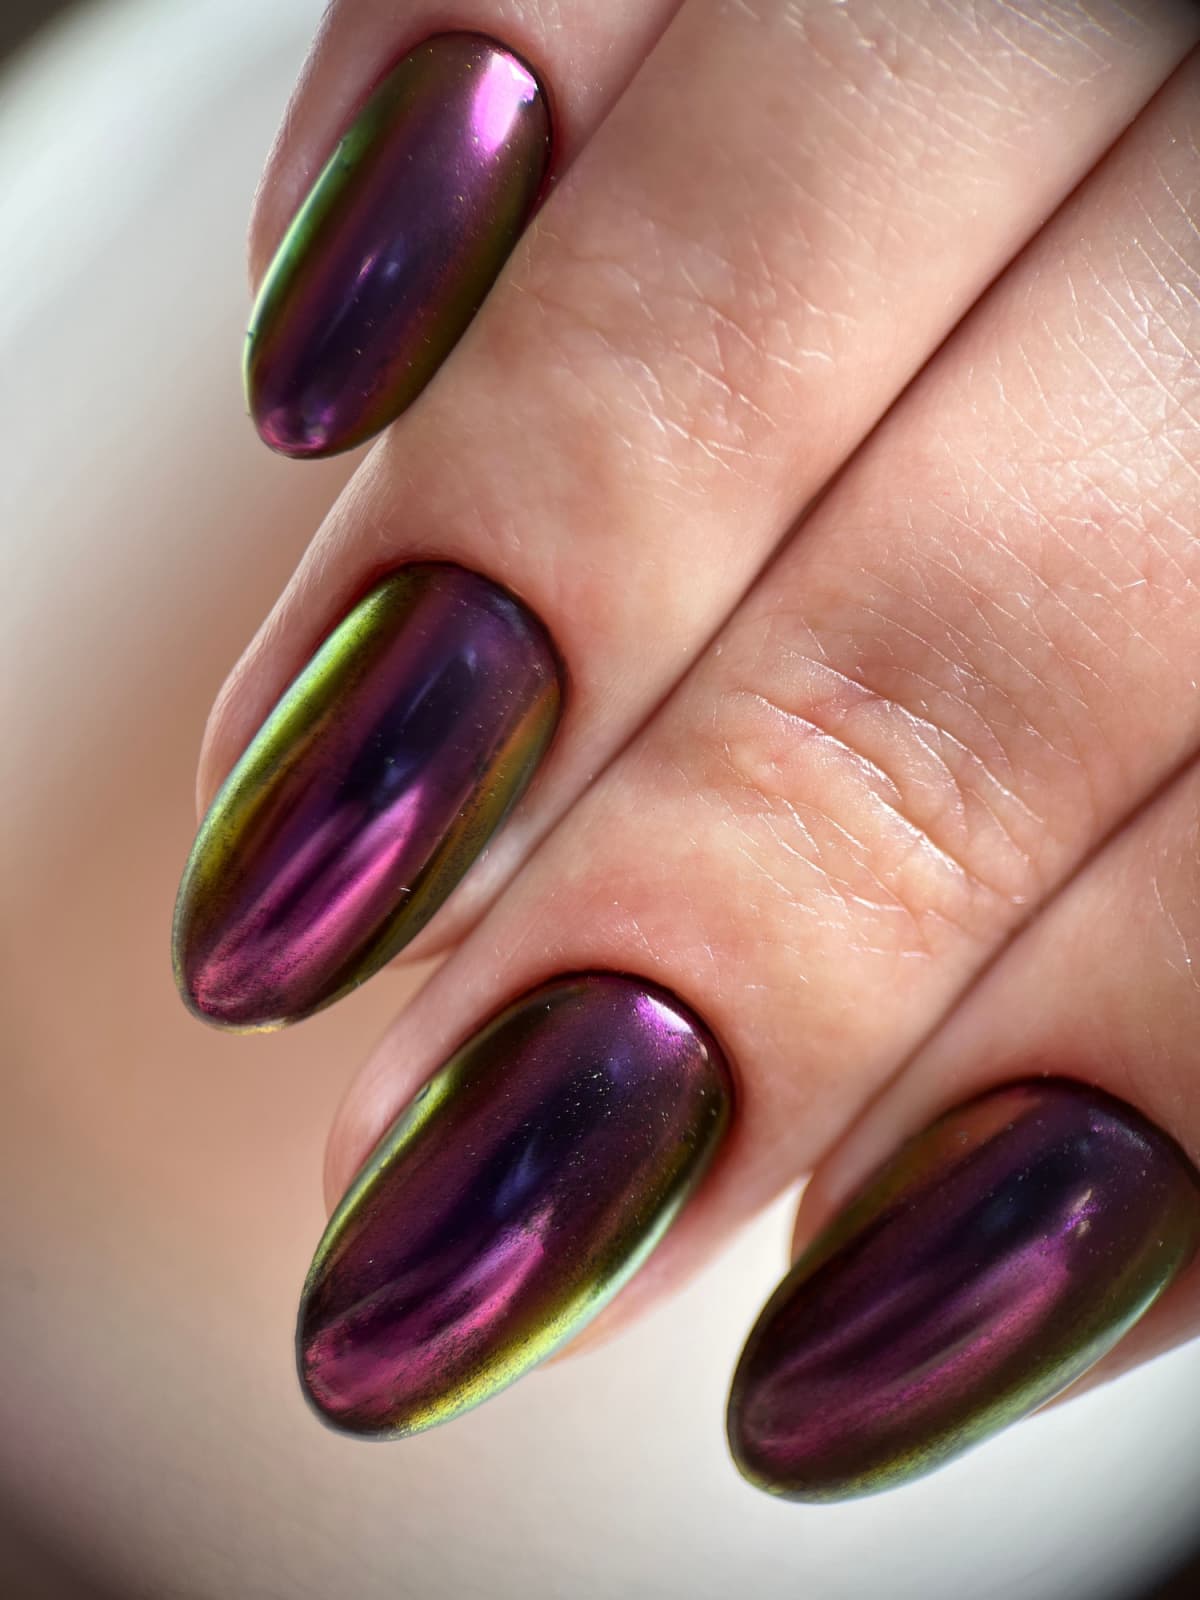 Bright iridescent gel polish with multicolored highlights. Women's hands with long almond-shaped nails and chameleon design hold a smartphone.